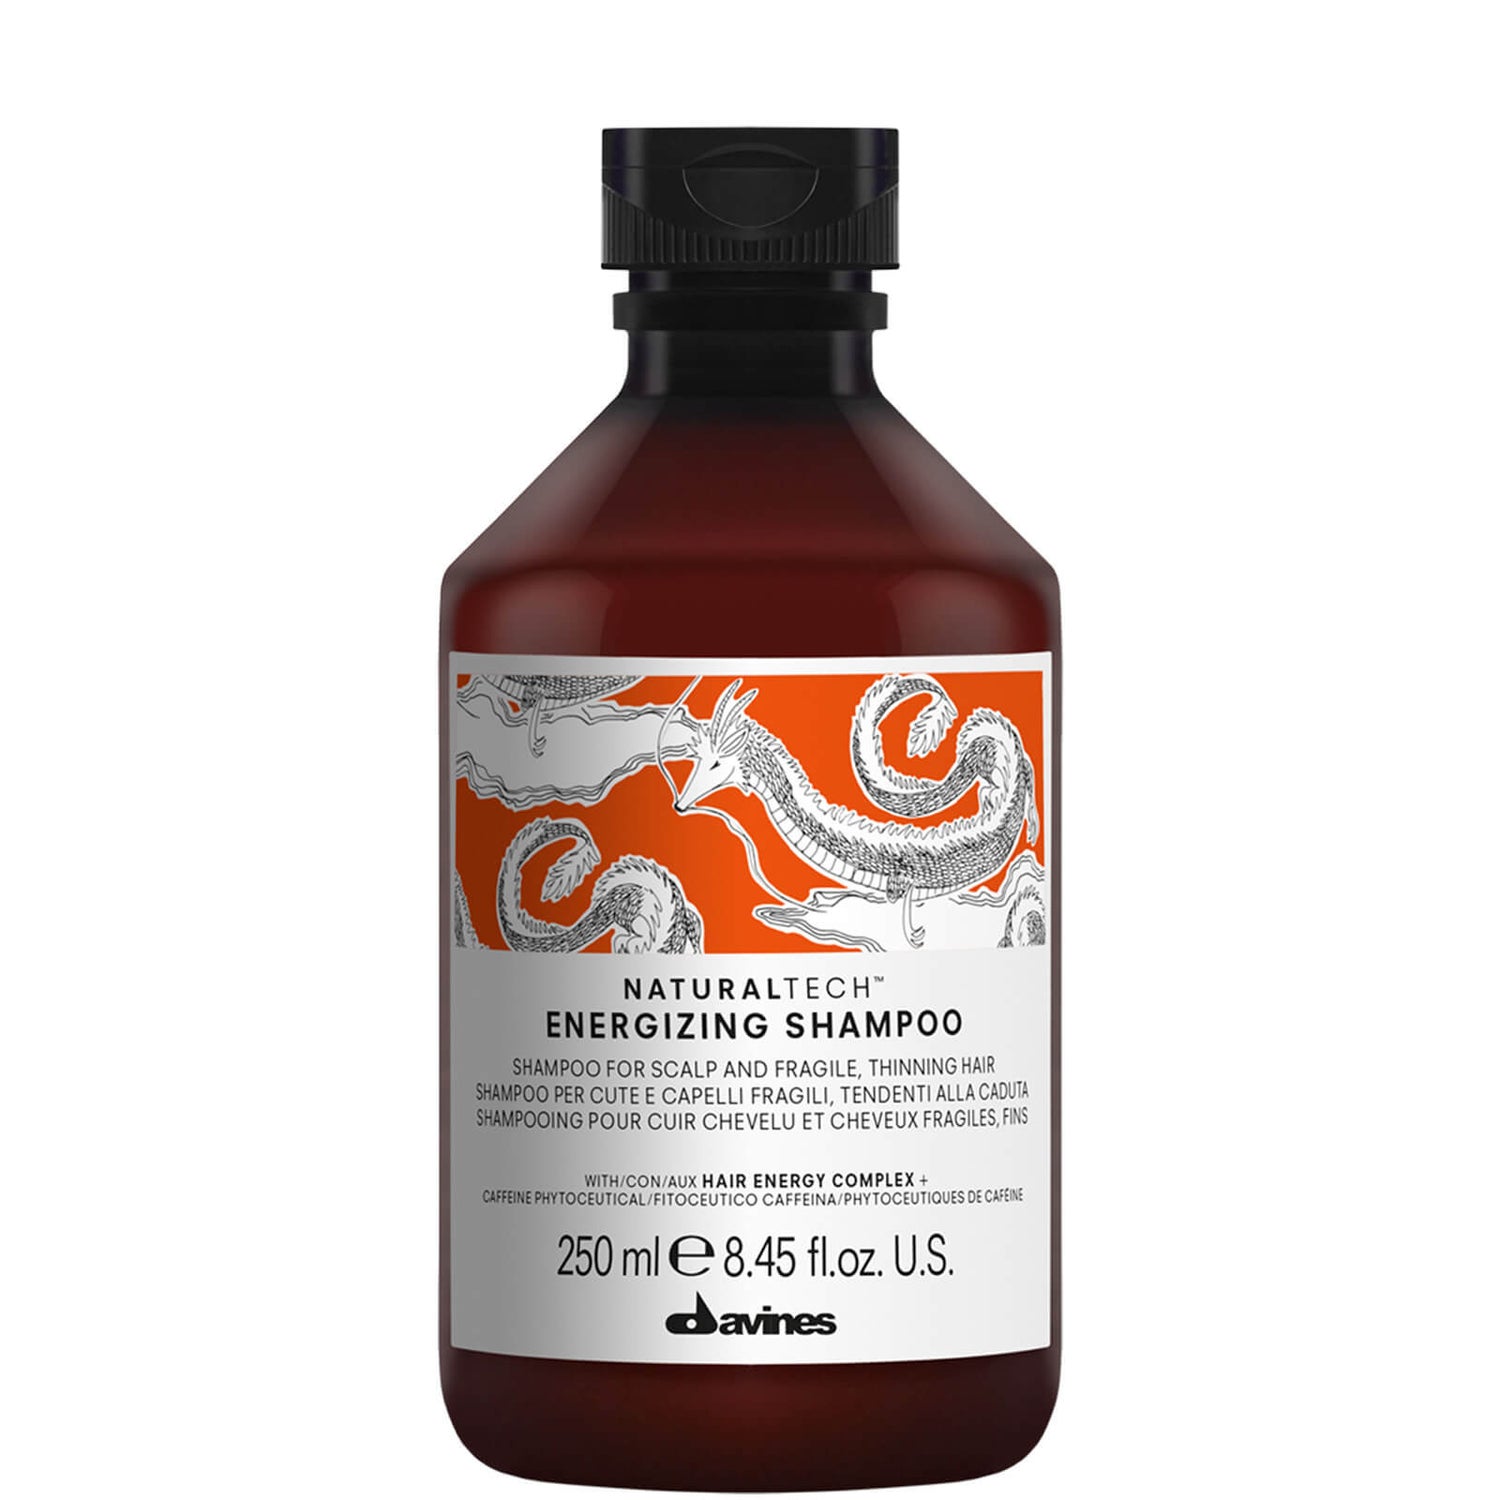 Davines Energizing Shampoo- How long does it take to grow your hair out